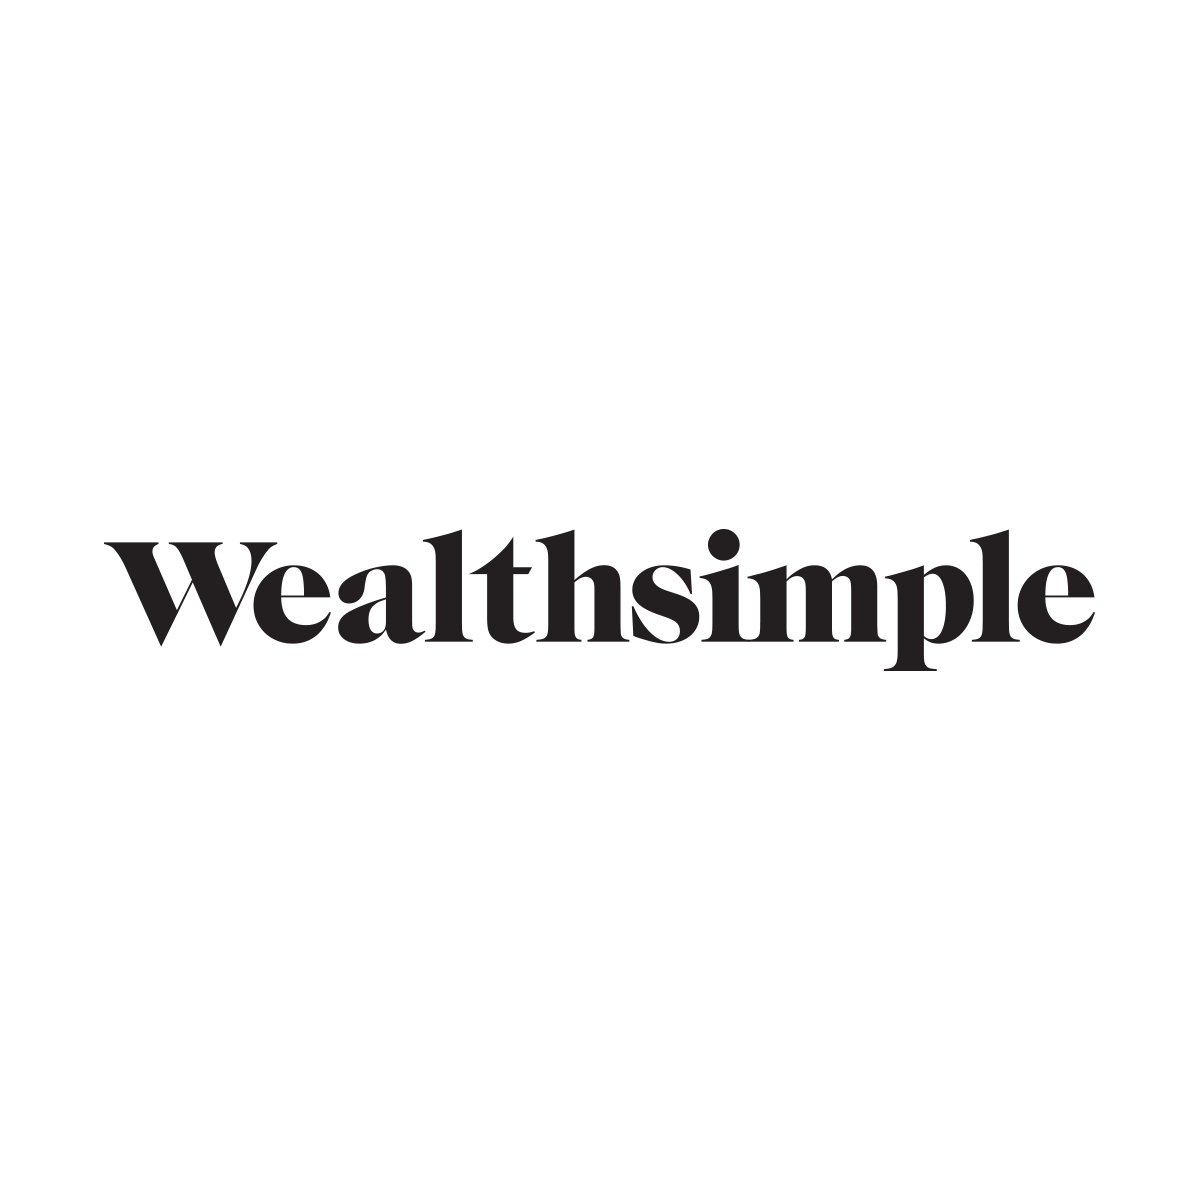 Personal accounts | Wealthsimple